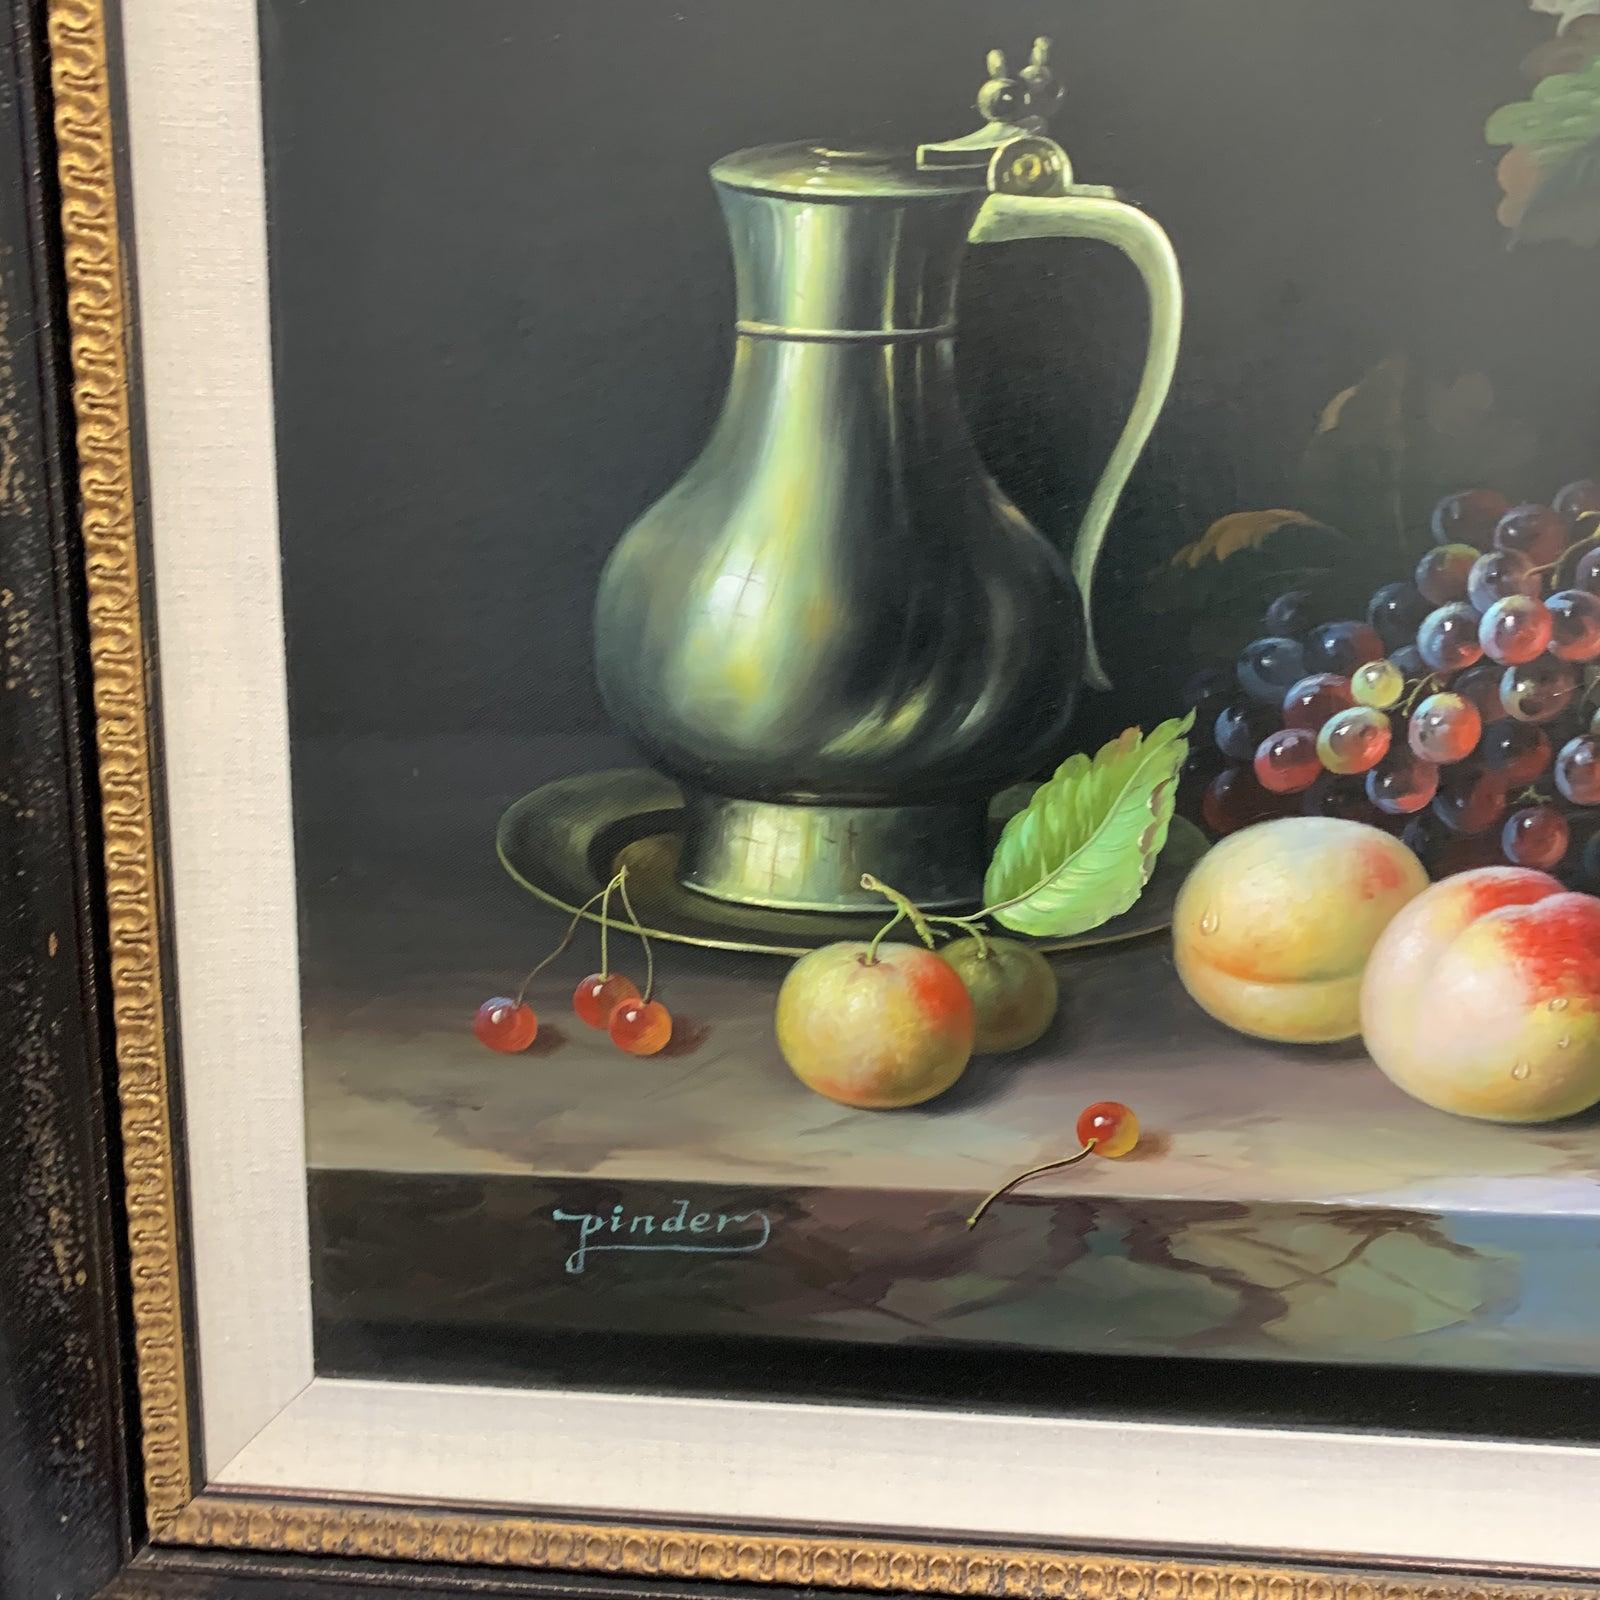 Presents a original artwork still life signed by Pinder. Chiaroscuro style showcases vibrant colors in shadows and highlights. Beautifully framed in a traditional frame and linen matte.